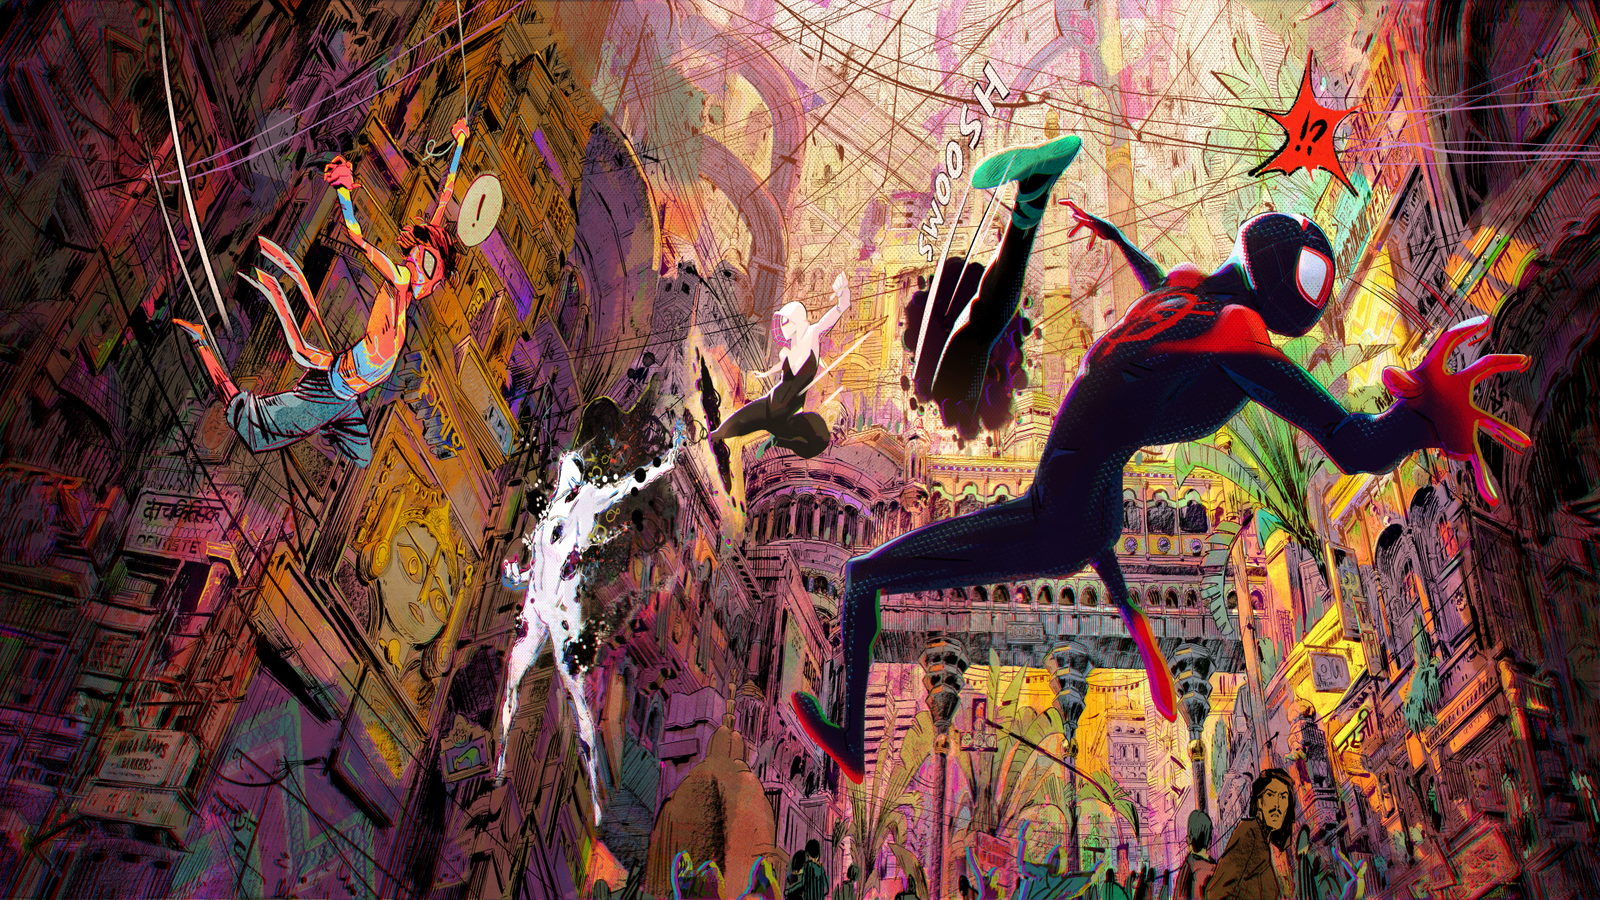 SPIDER-MAN ACROSS THE SPIDERVERSE IS NOW ON NETFLIX! : r/Spiderman